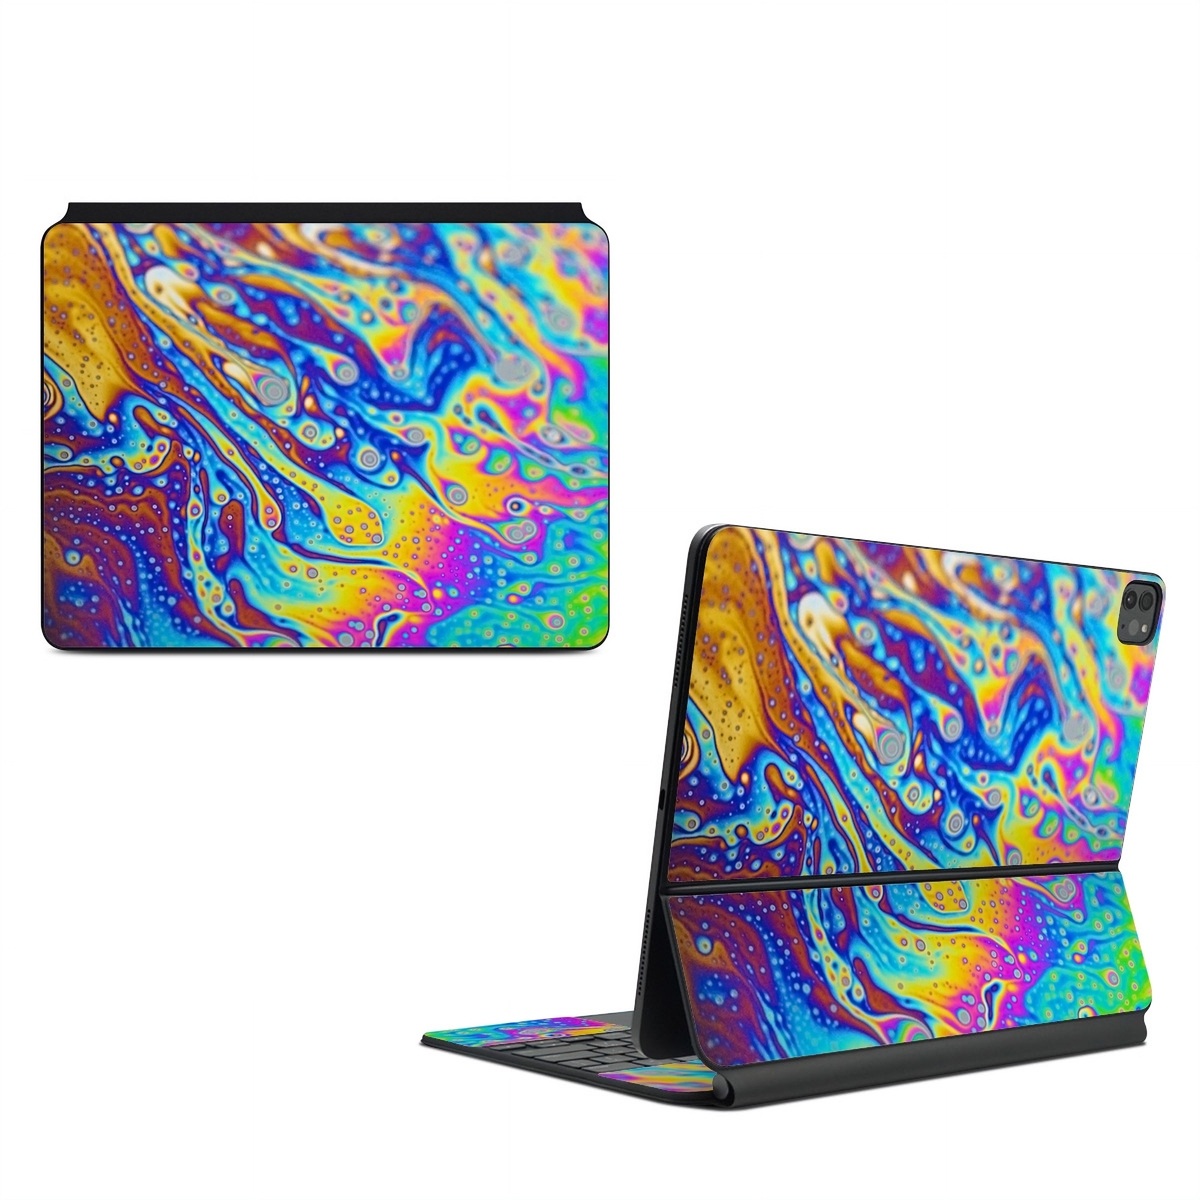 Magic Keyboard for iPad Series Skin design of Psychedelic art, Blue, Pattern, Art, Visual arts, Water, Organism, Colorfulness, Design, Textile, with gray, blue, orange, purple, green colors